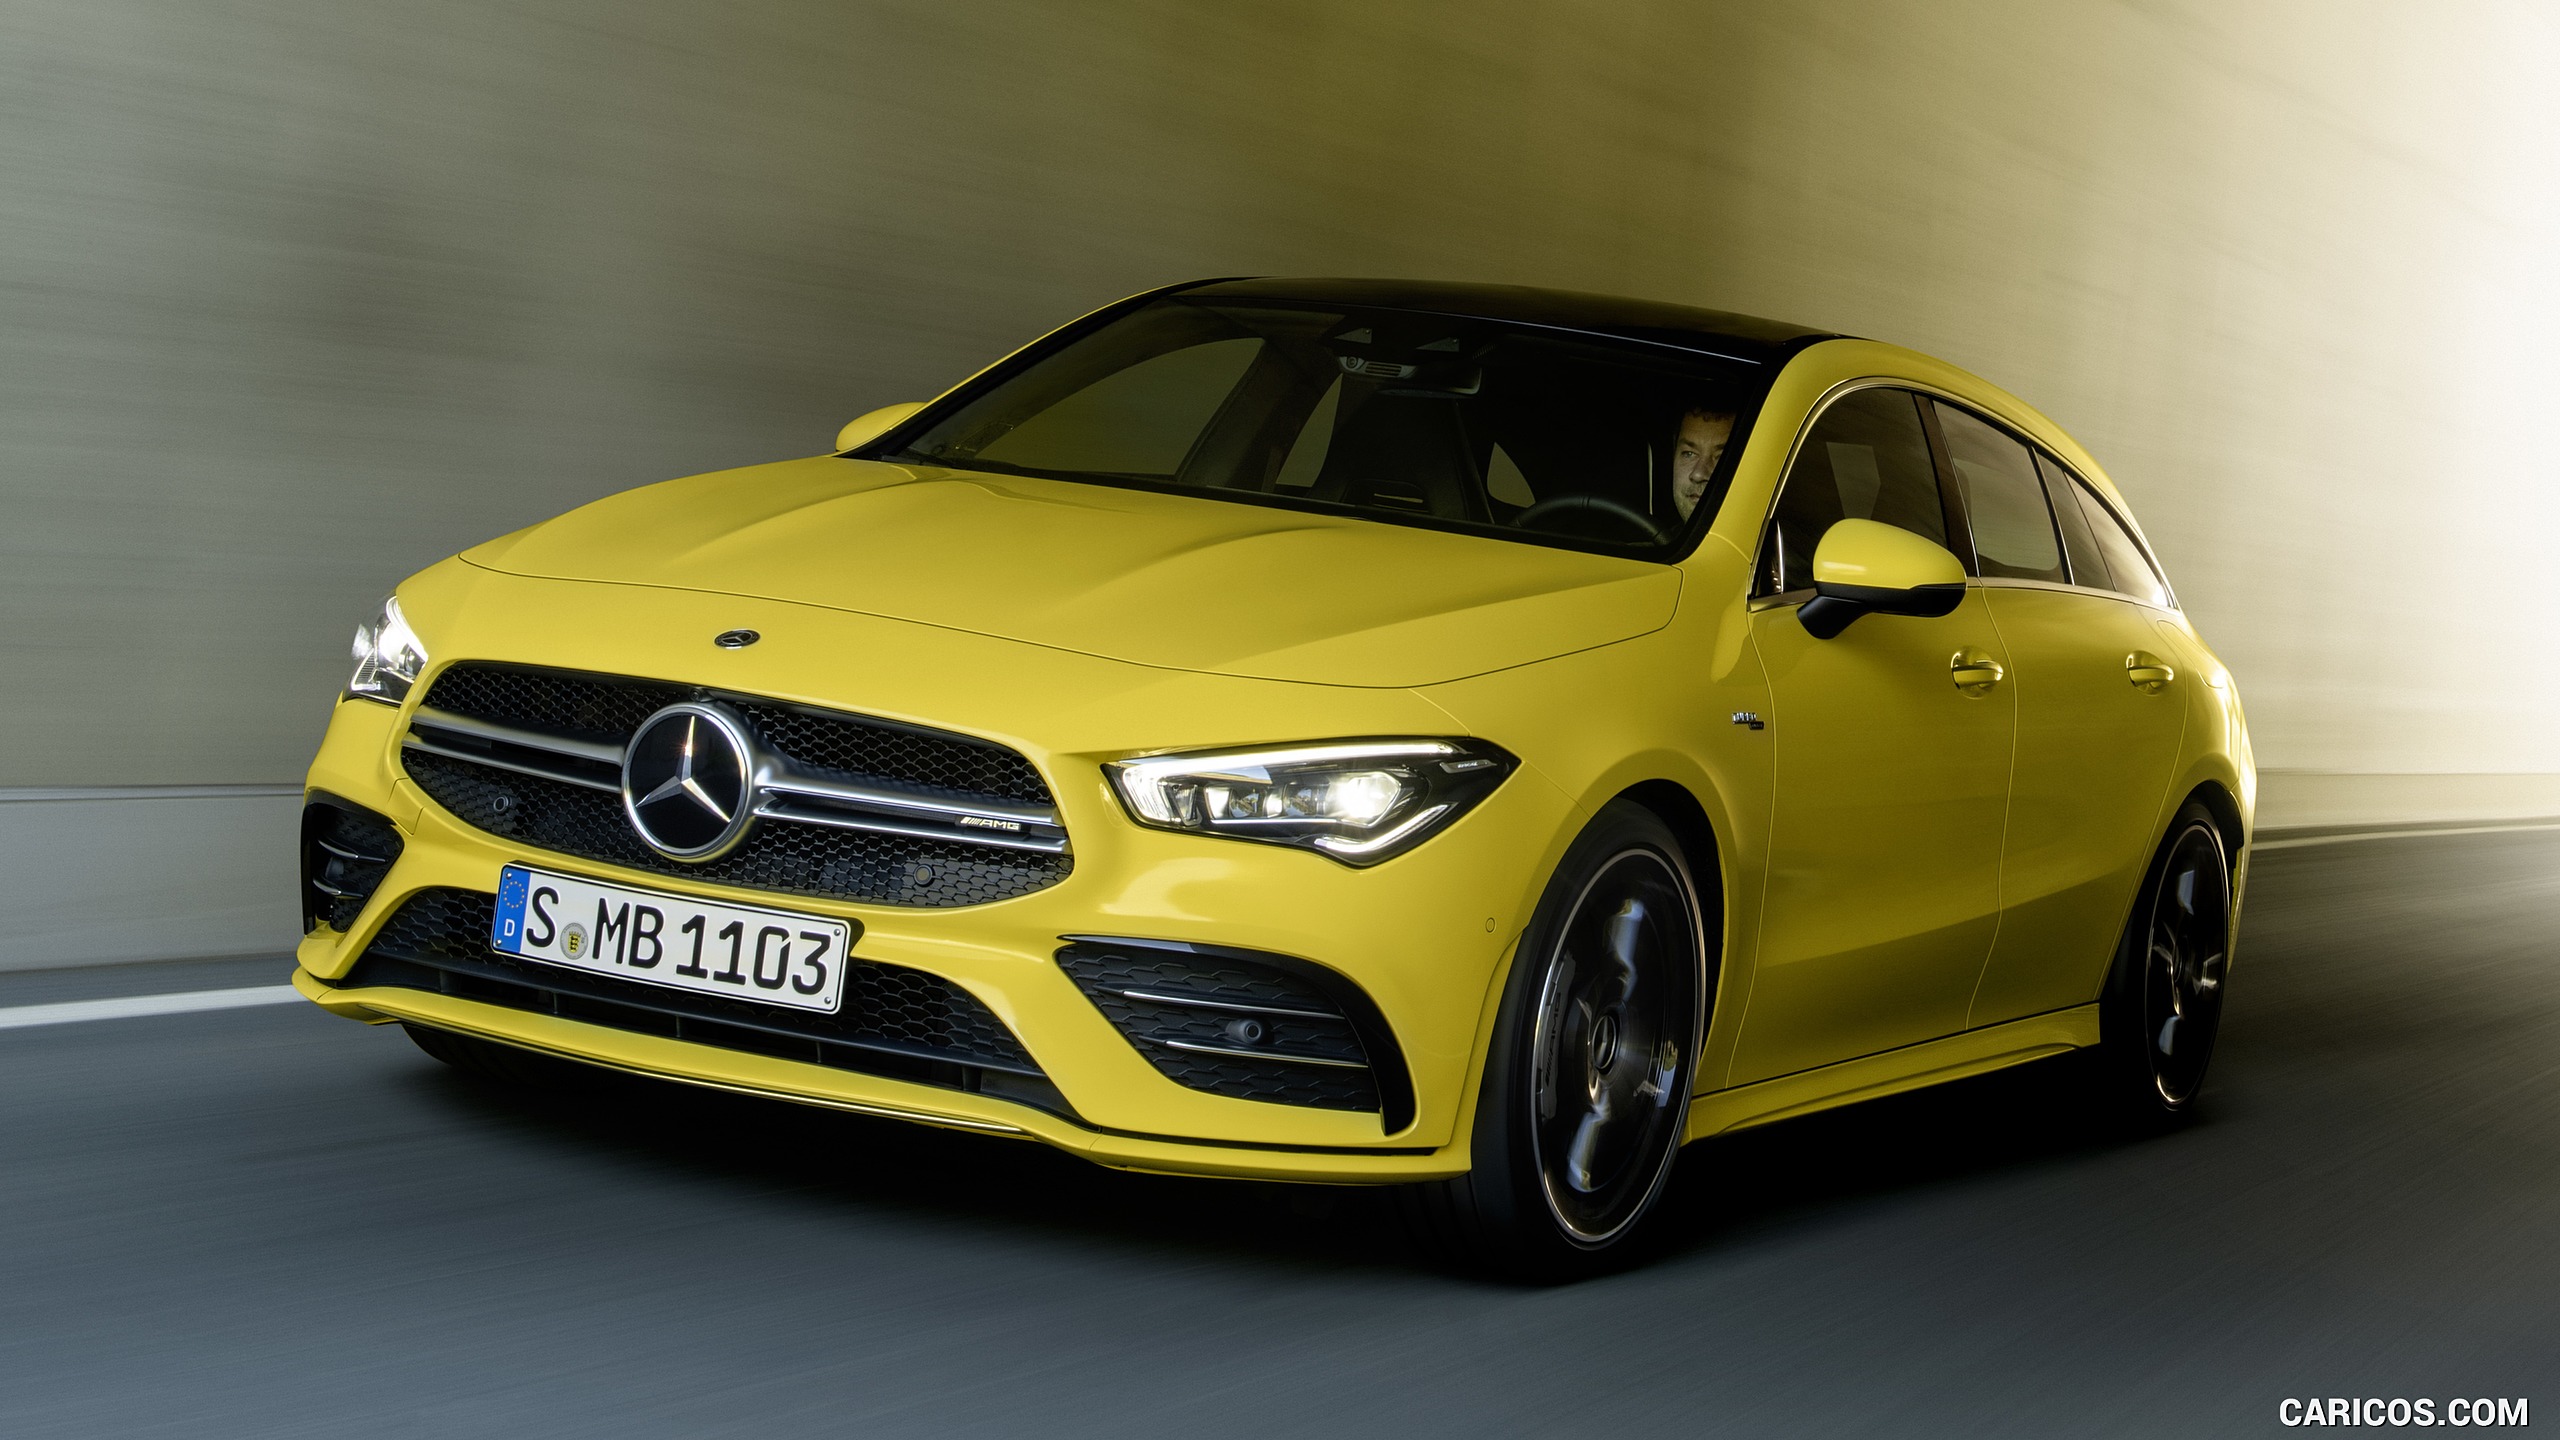 2020 Mercedes-AMG CLA 35 4MATIC Shooting Brake - Front Three-Quarter, #9 of 21